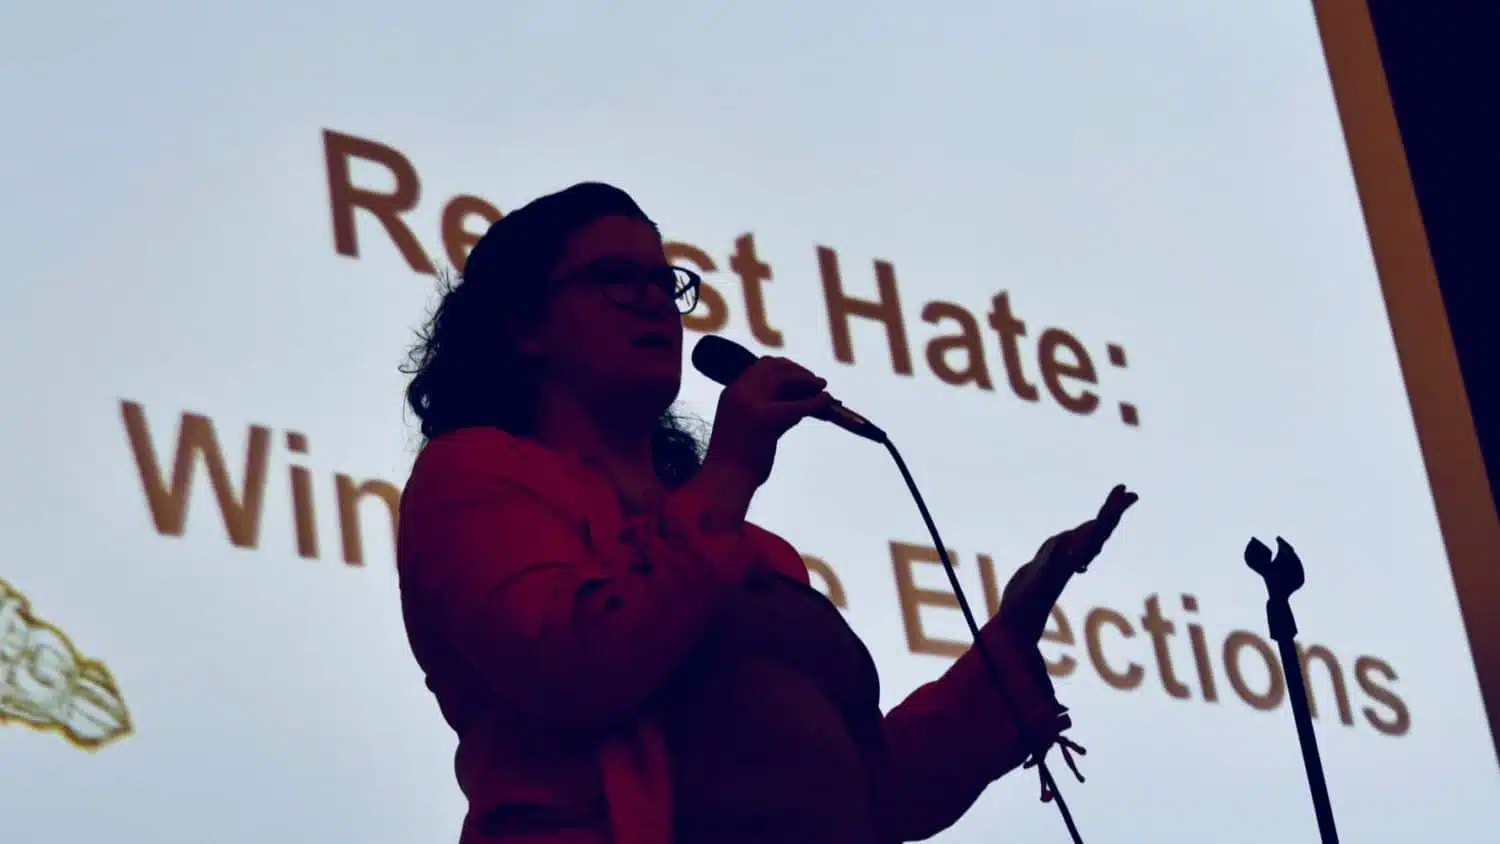 Resisting hate by winning some elections